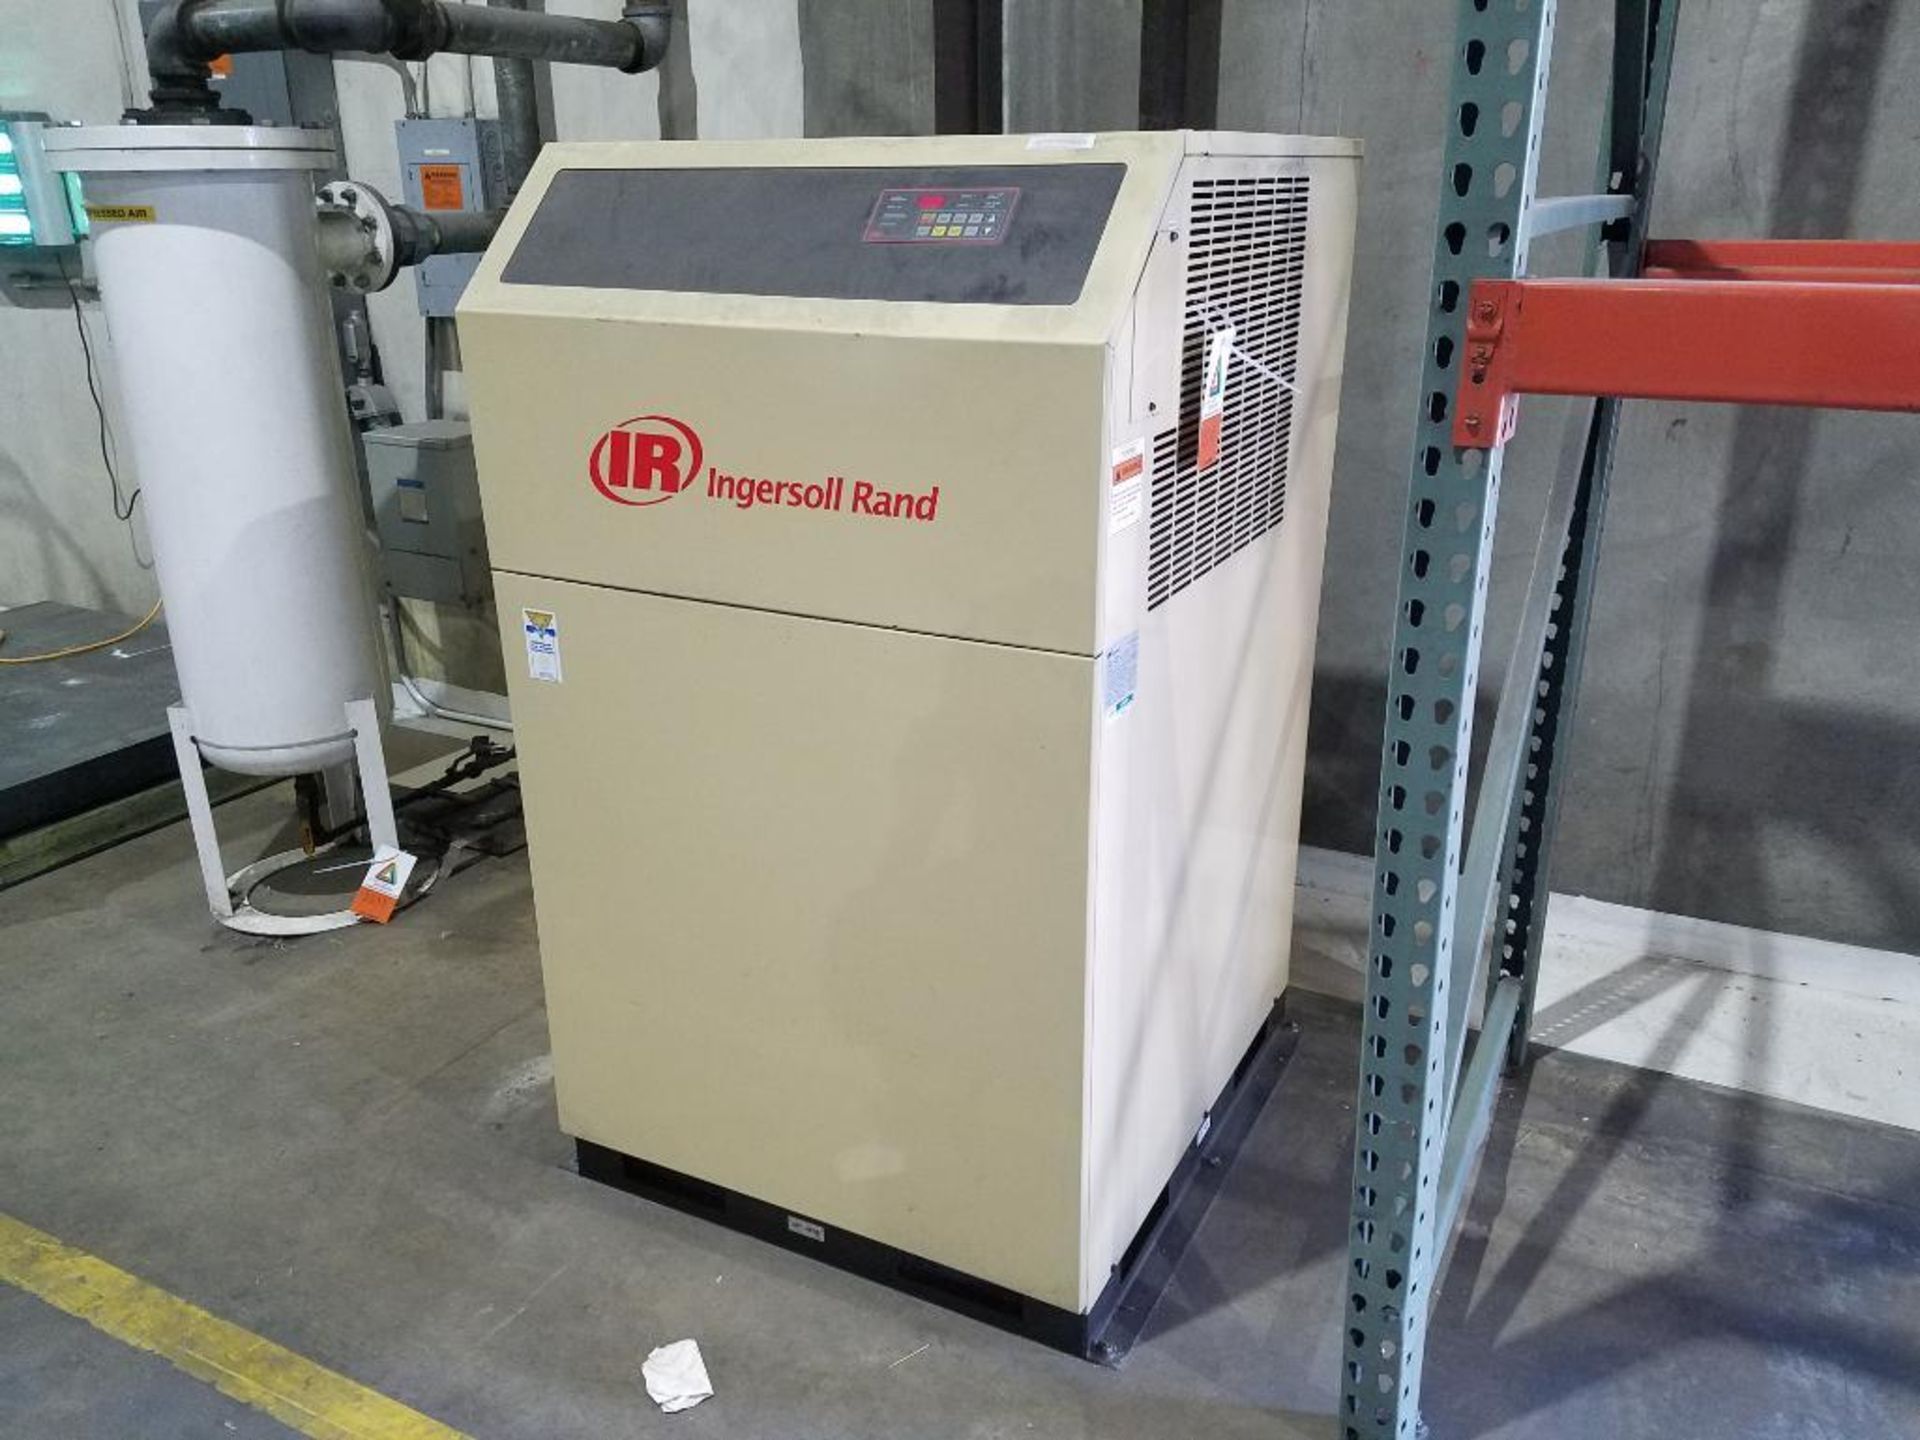 Ingersoll Rand refrigerated air dryer